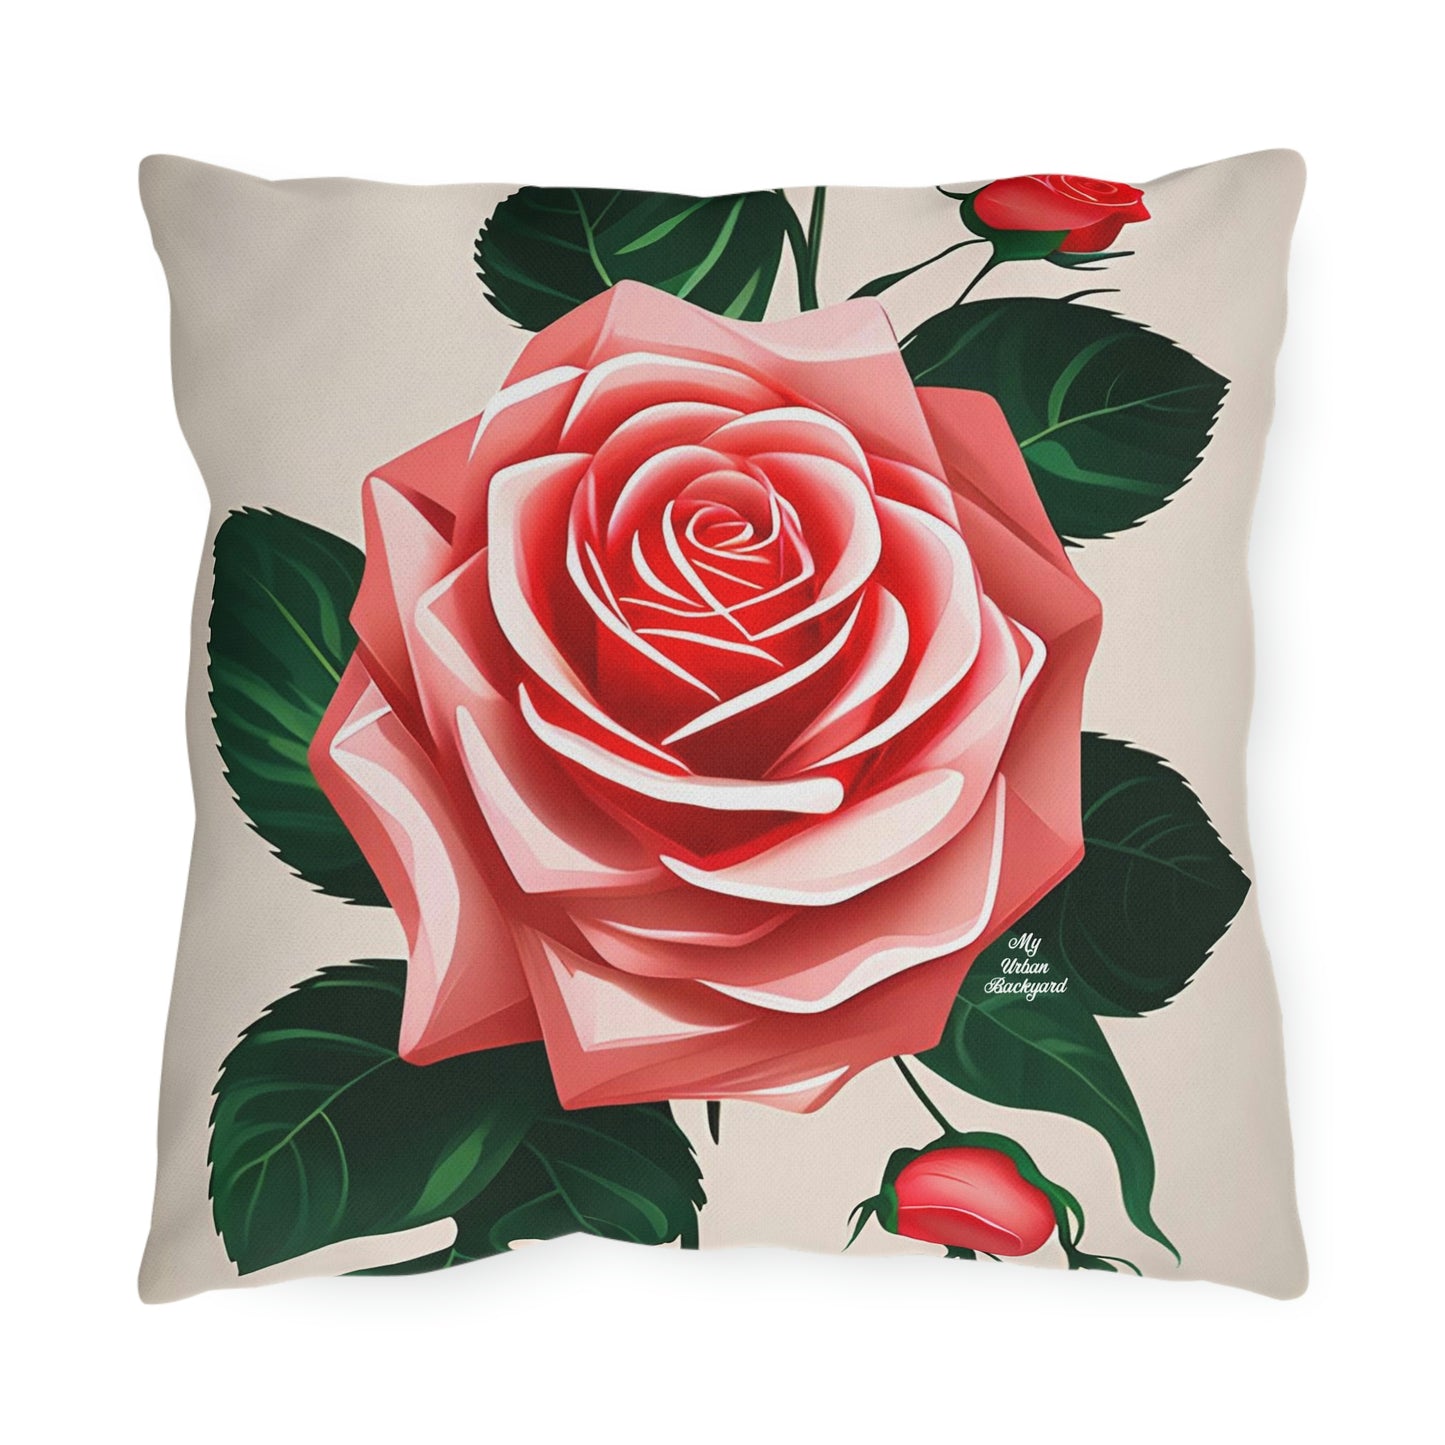 Pink Rose Flowers, Versatile Throw Pillow - Home or Office Decor